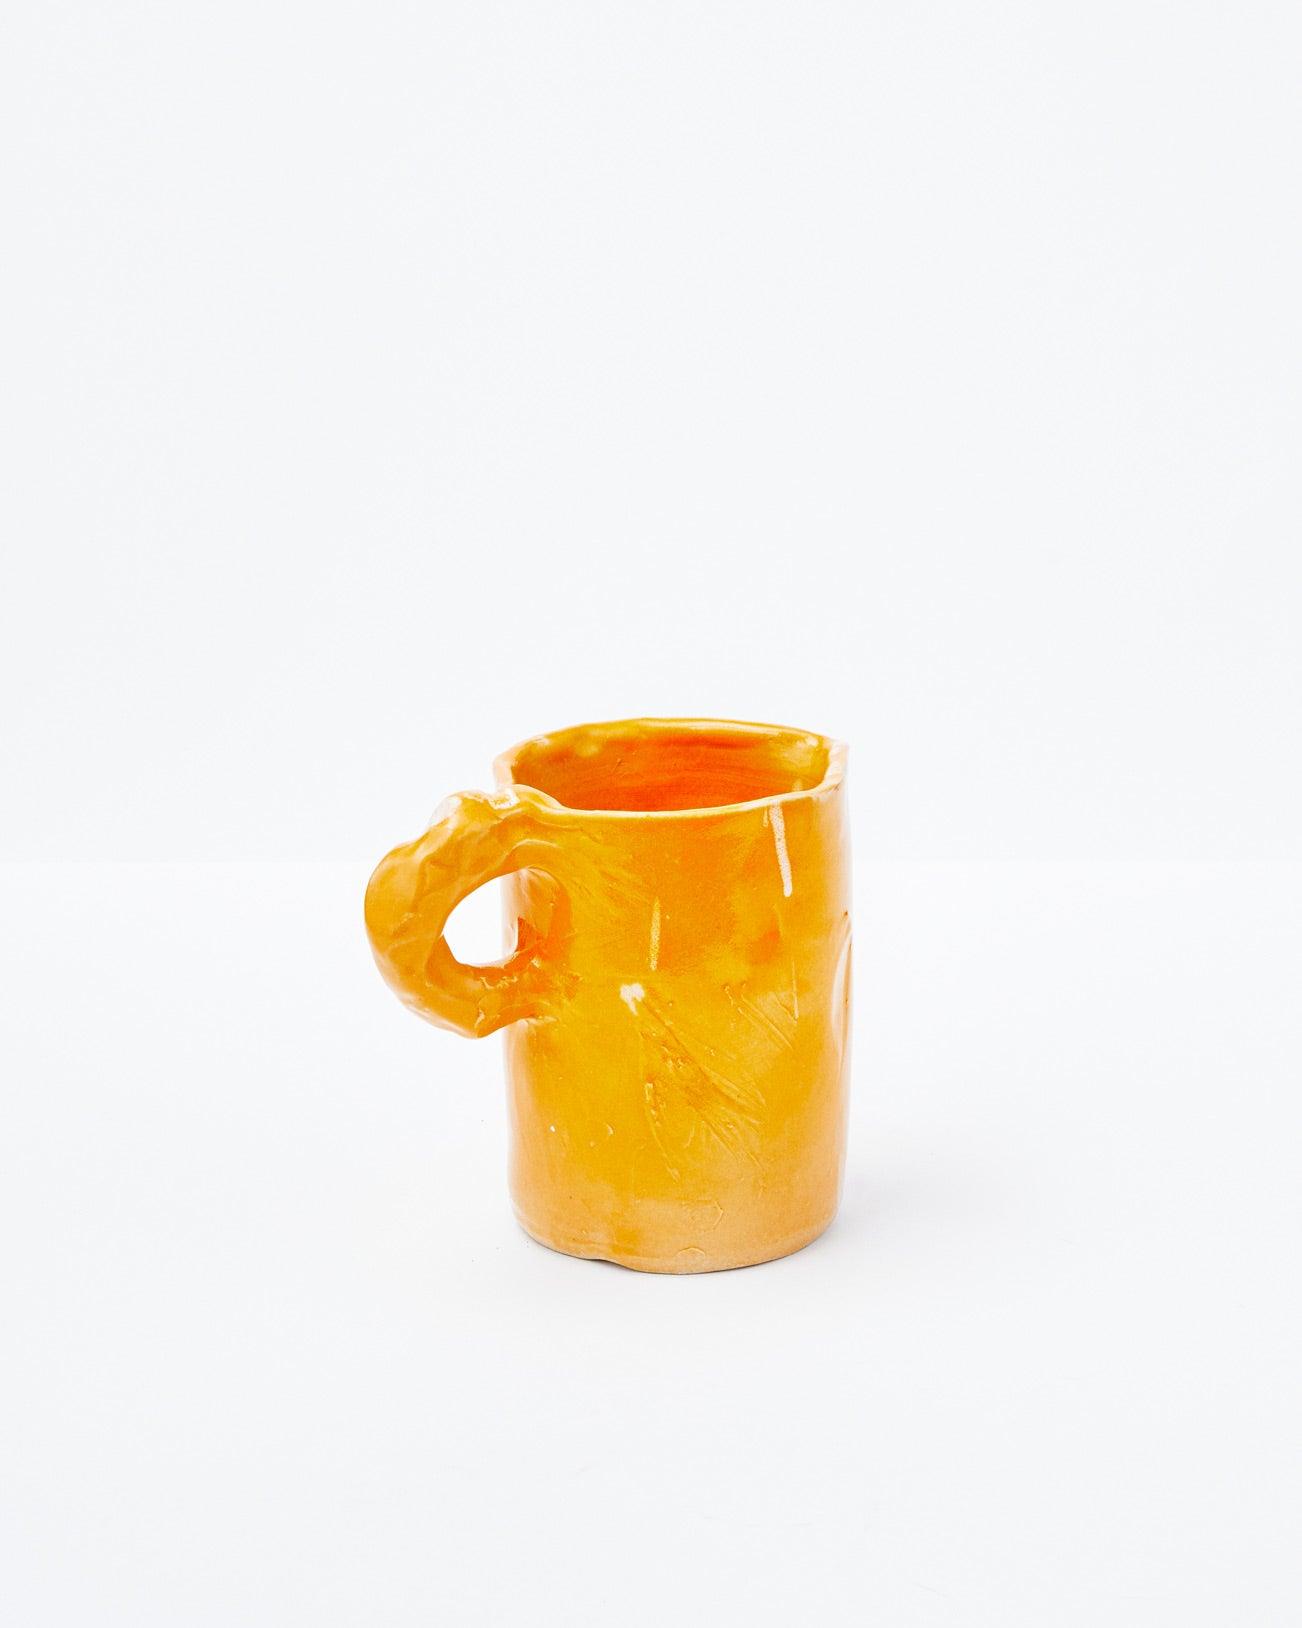 Orange modern ceramic pitcher with diagonal handle on a white background